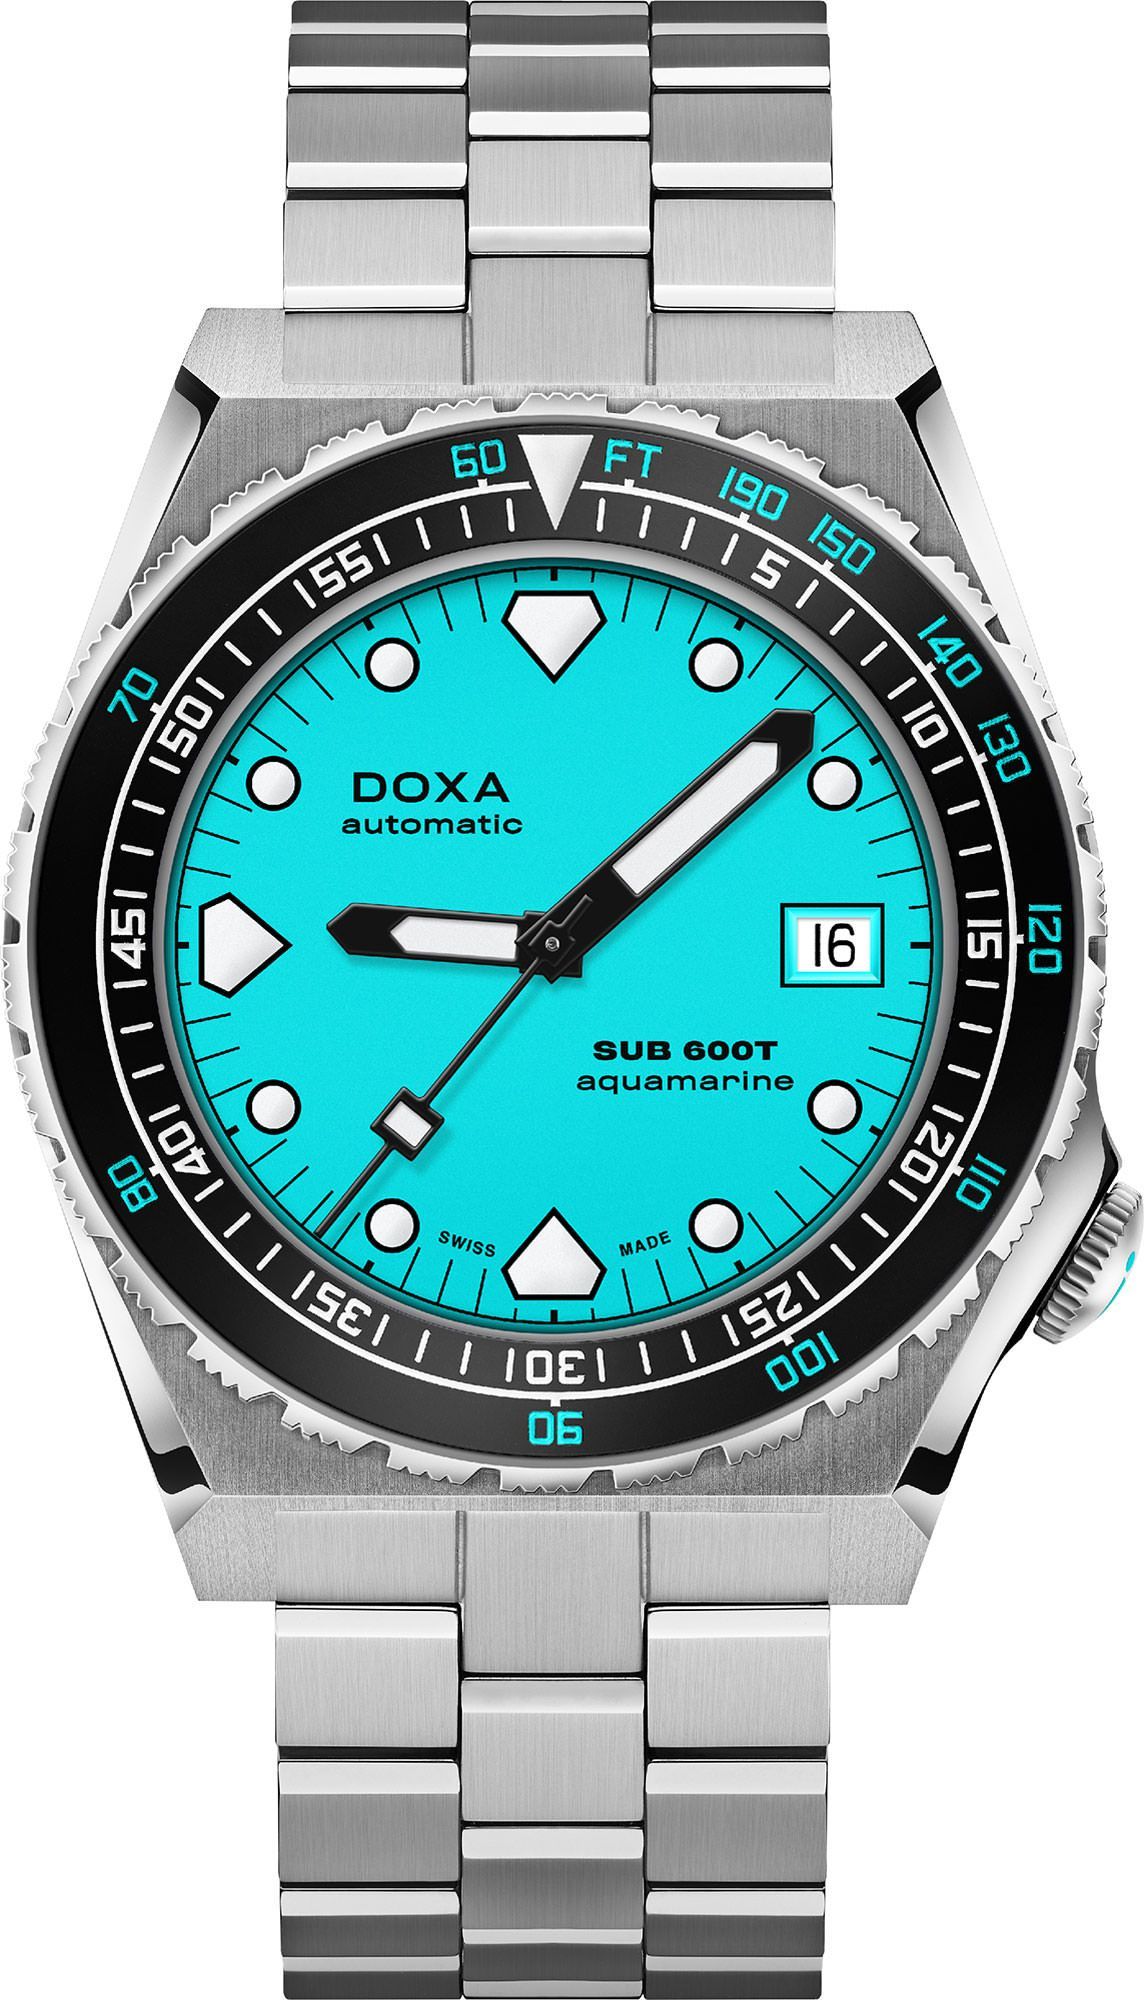 Doxa SUB 600T Aquamarine Turquoise Dial 40 mm Automatic Watch For Men - 1